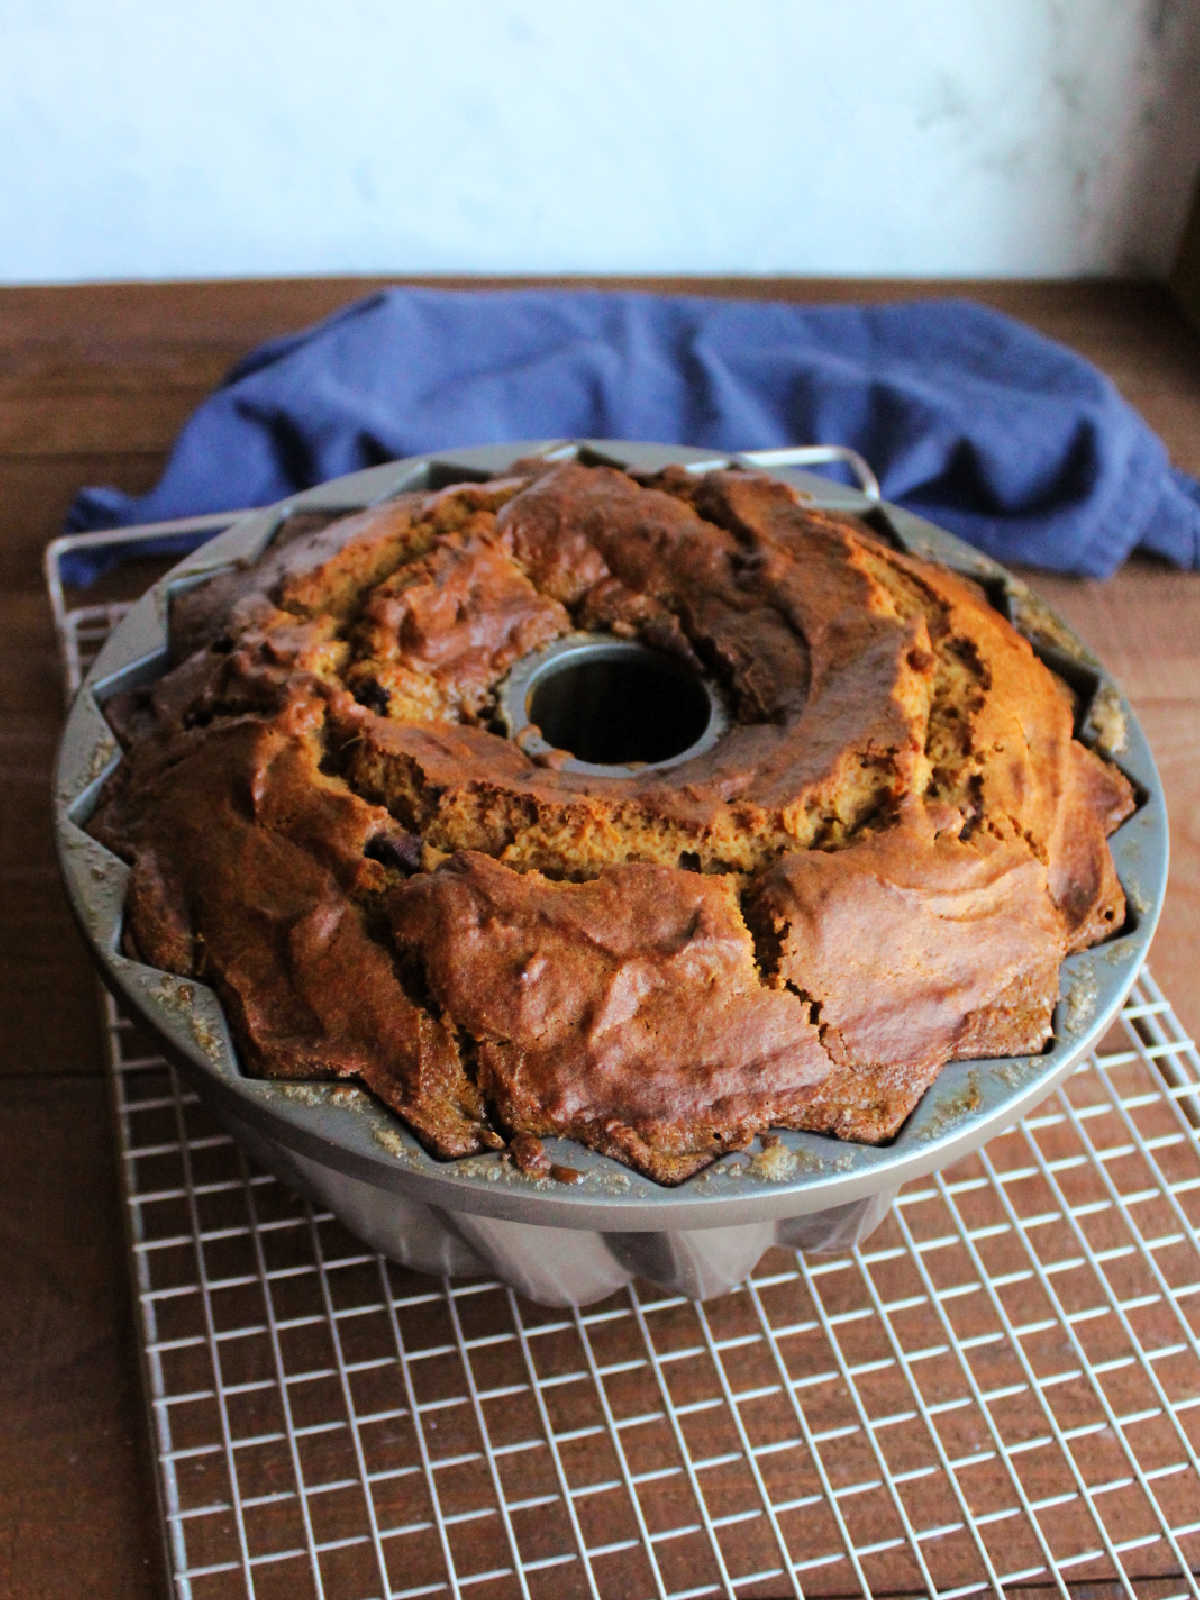 Freshly baked pumpkin bundt cake cooling on wire rack before being tipped out of the pan.